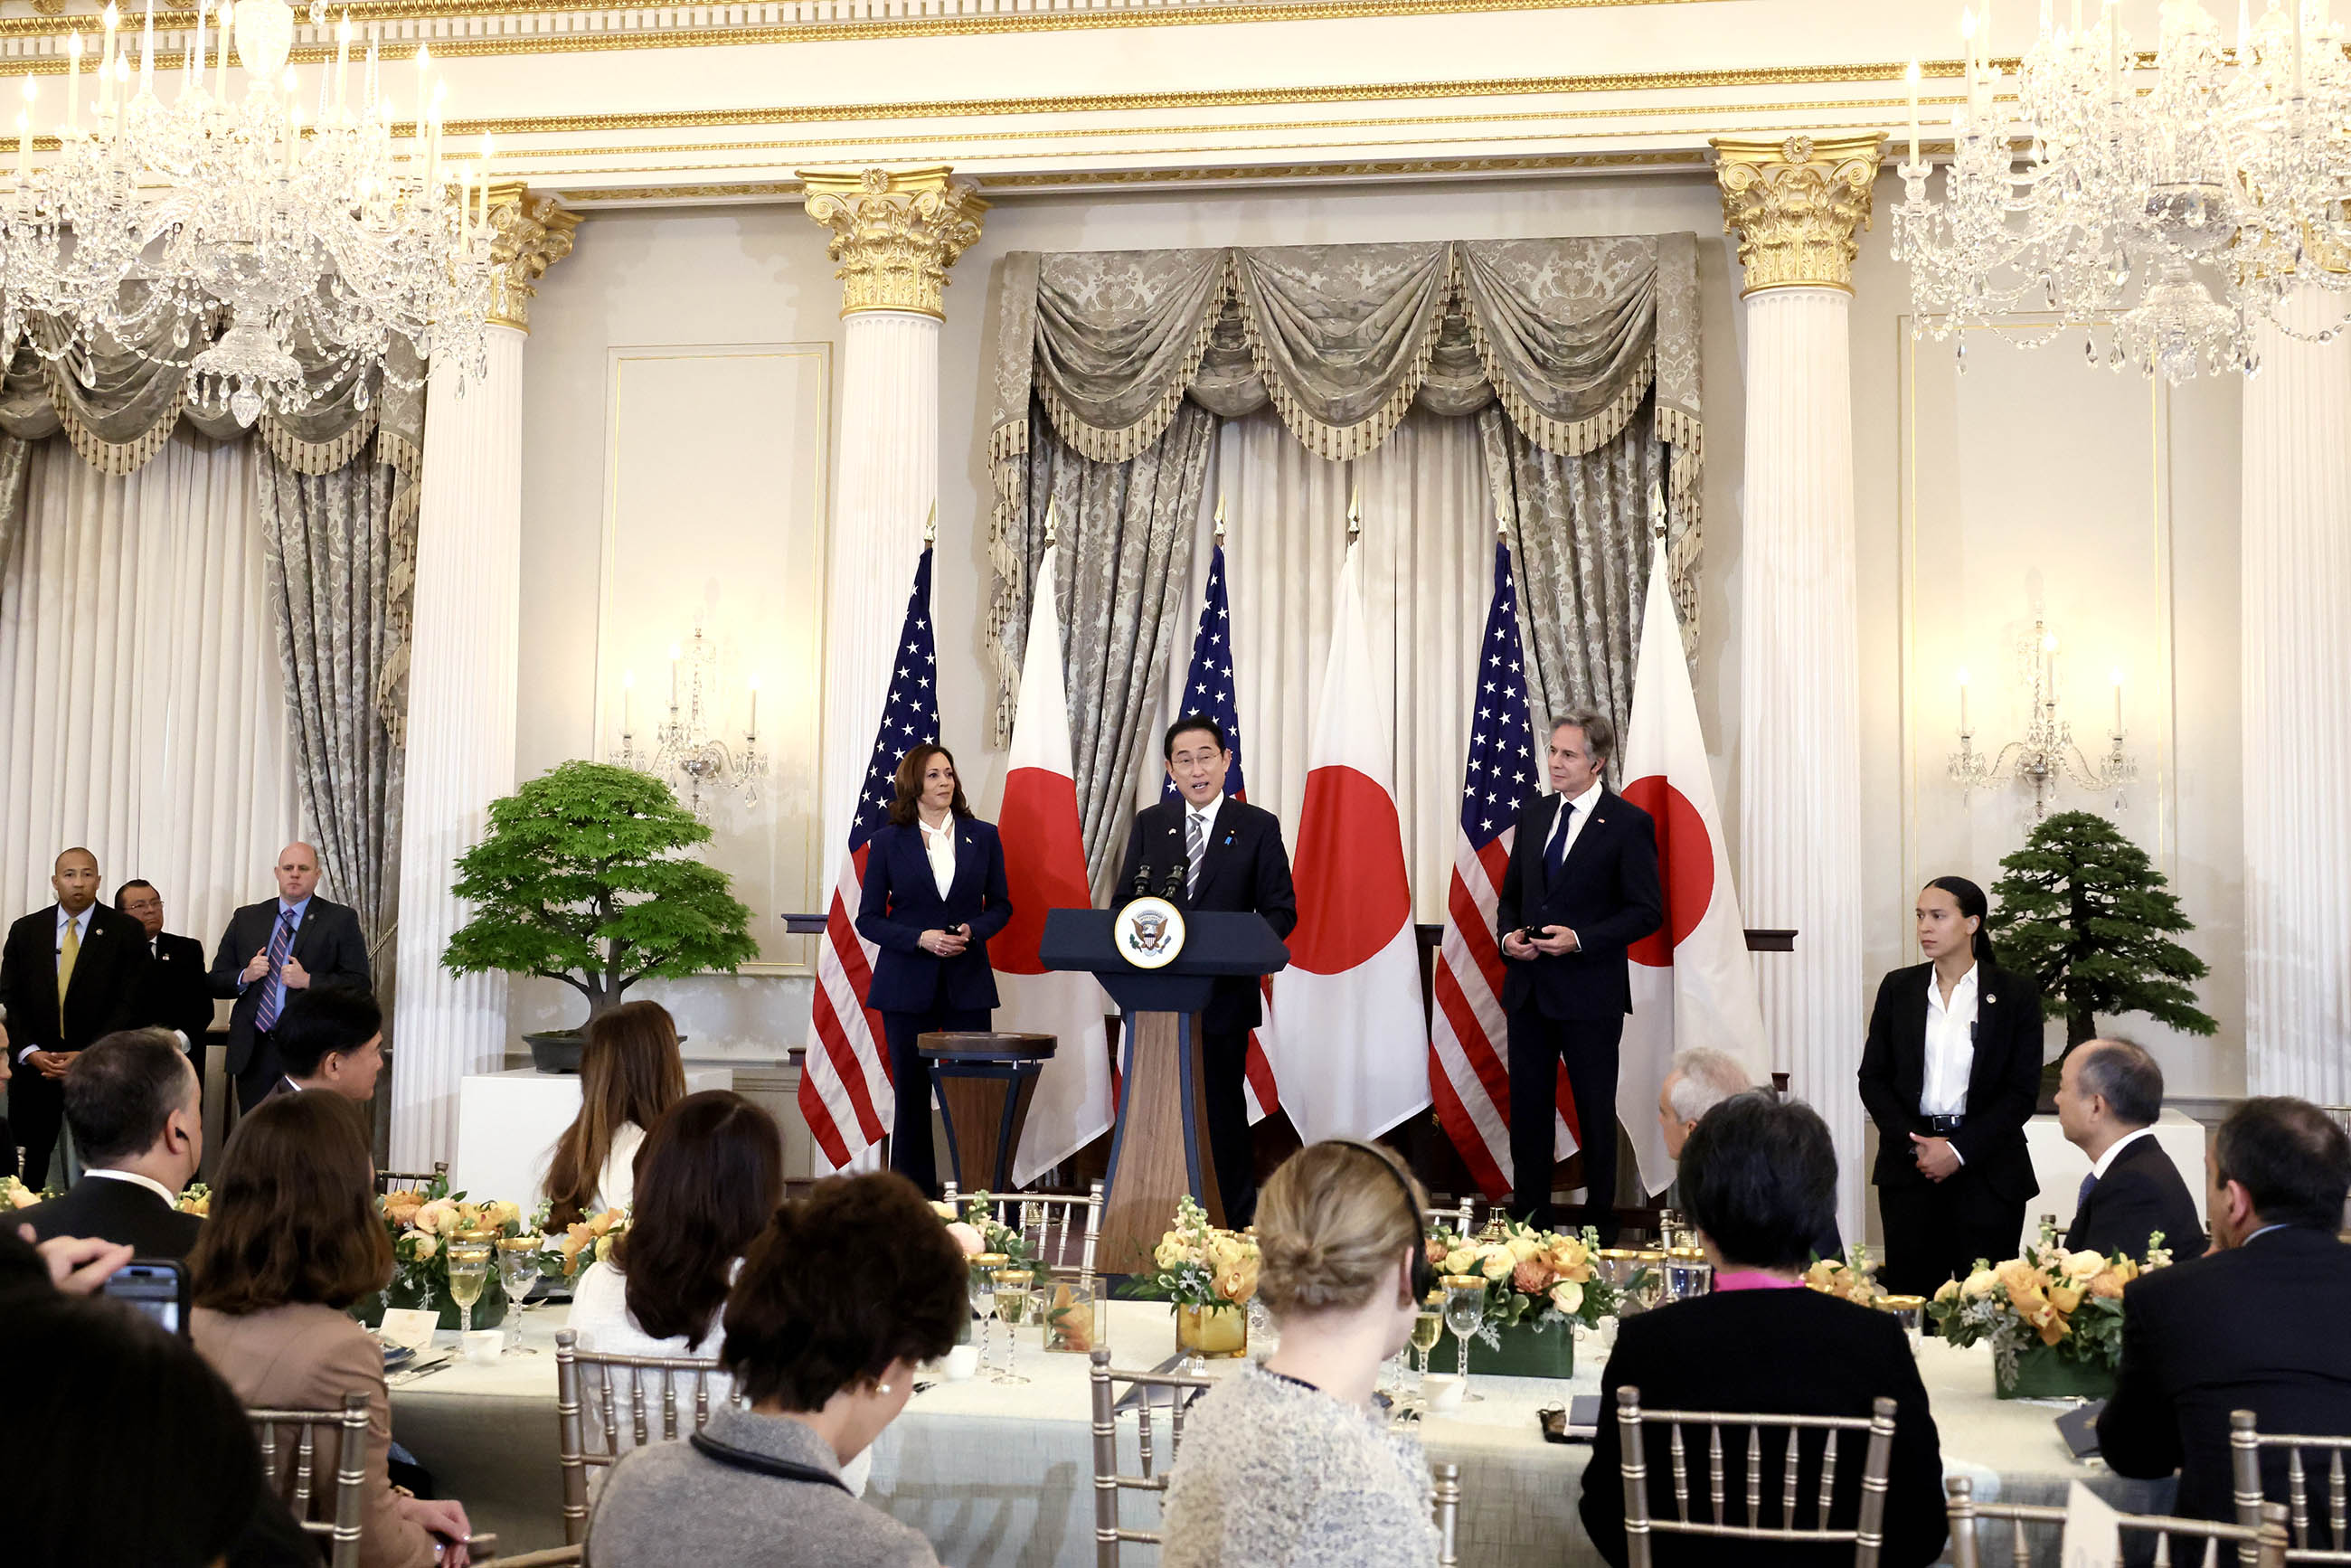 Prime Minister Kishida attending the State Luncheon hosted by Vice President Harris and Secretary of State Blinken (2)